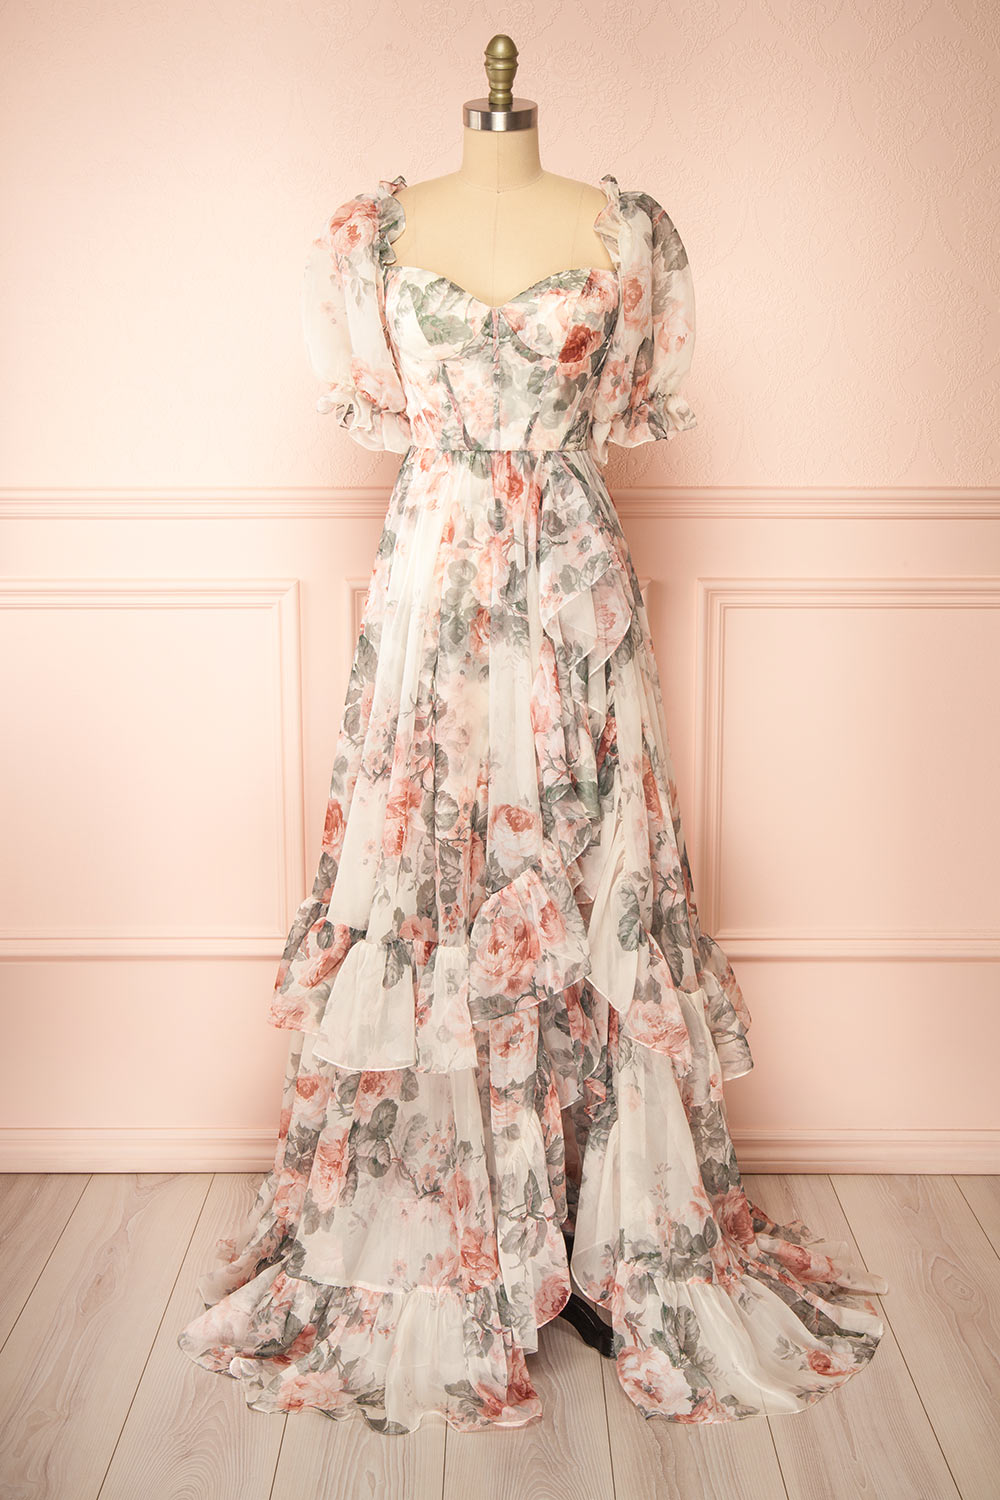 Reine Cap Sleeve Corset Gown in Floral Jacquard